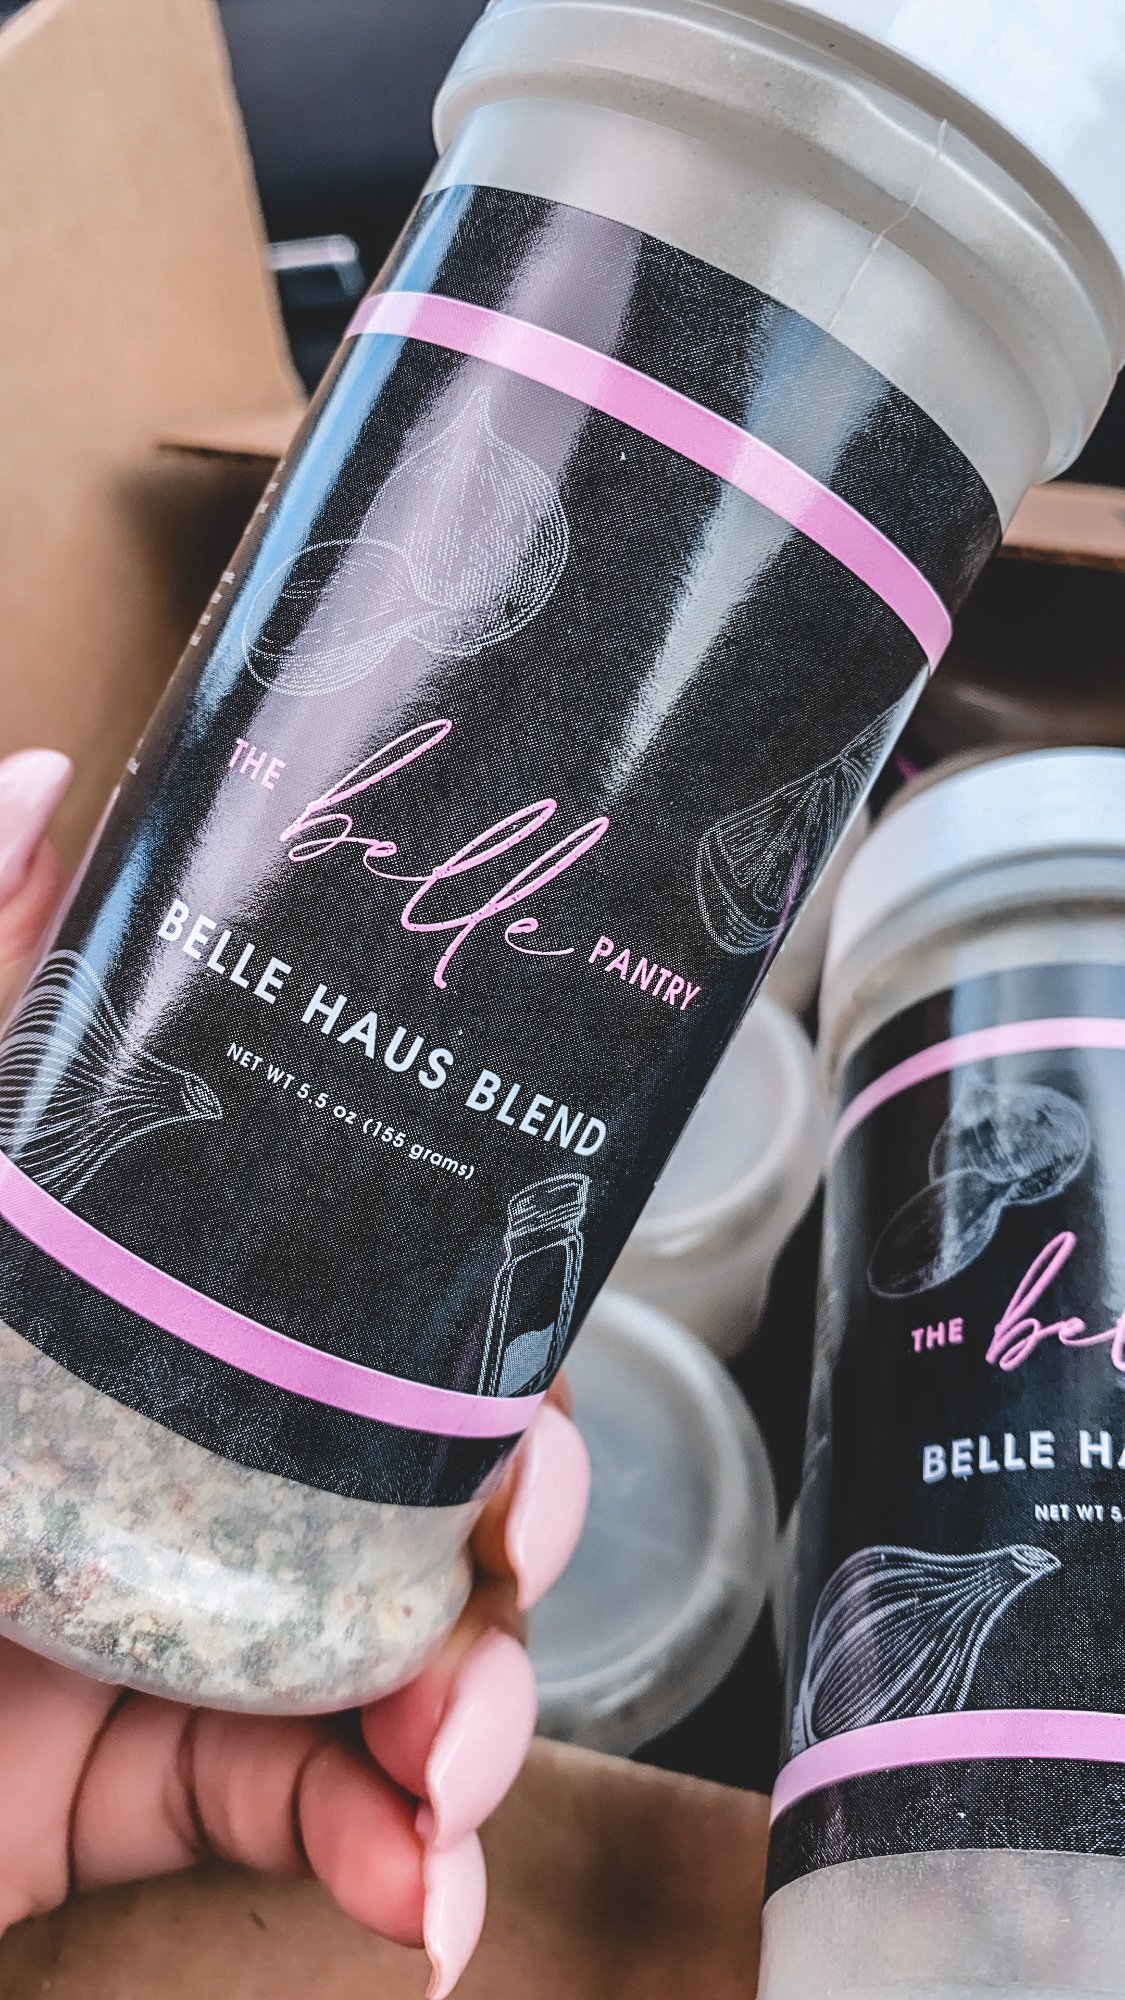 Image of The Belle Haus Blend